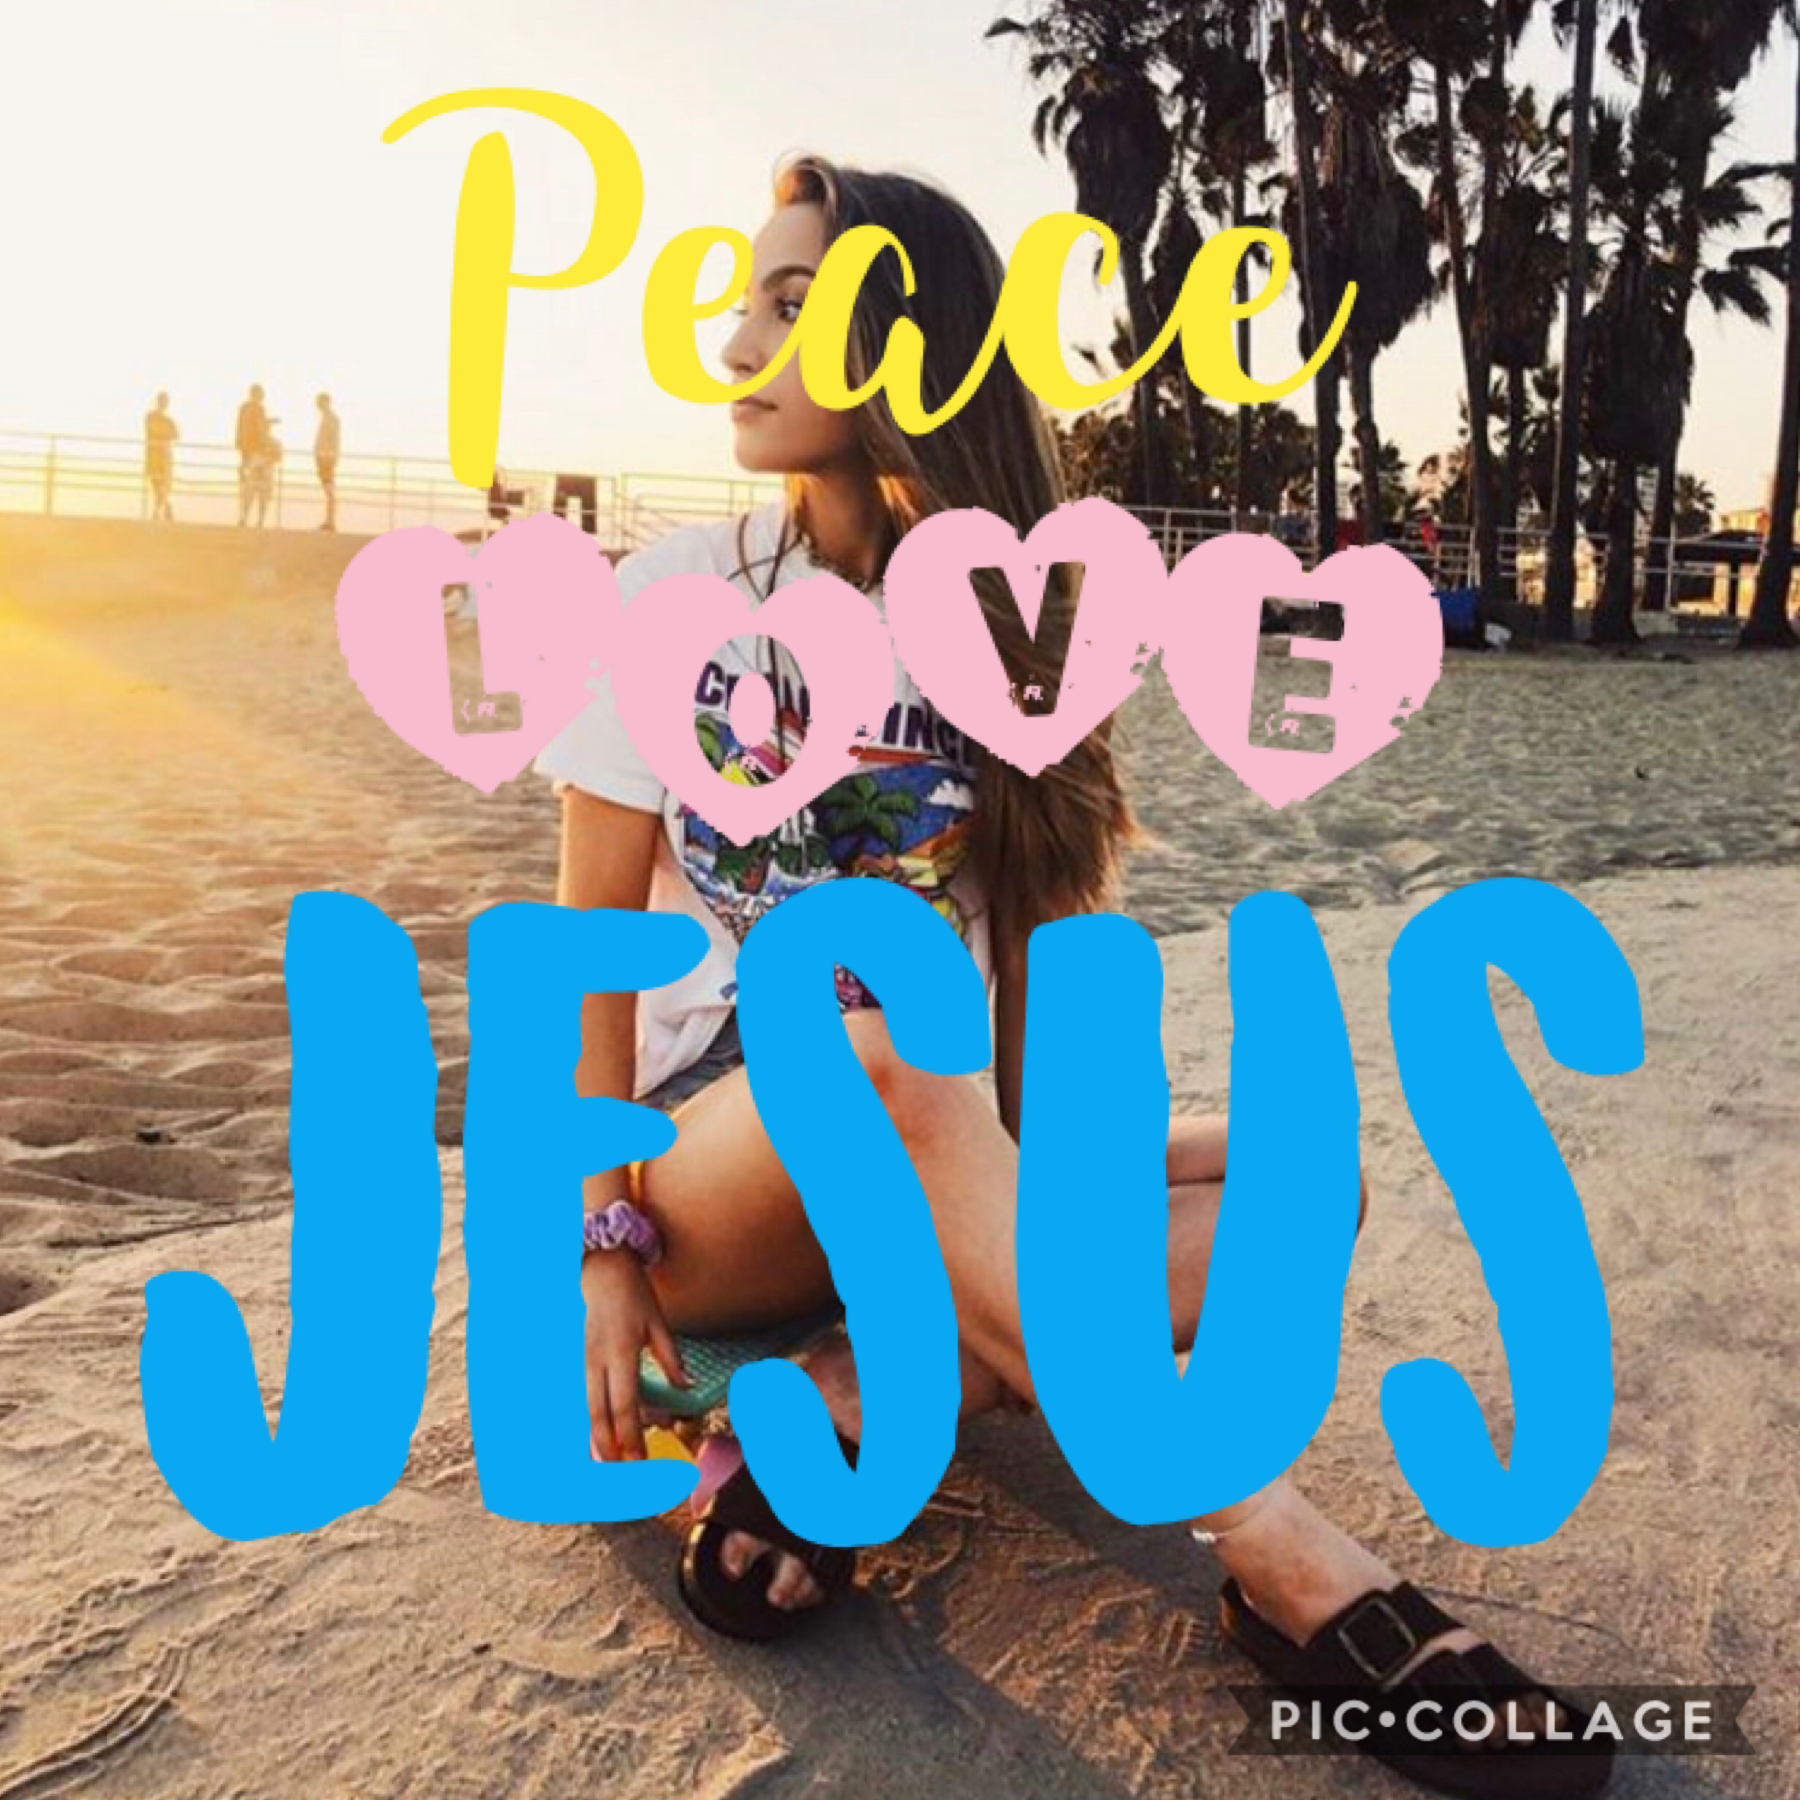                      ❤️tap❤️
Peace, Love, and Jesus! Jesus is all you need girls! He will be there for you when you finally come out of that toxic relationship. He will be there when someone calls you ugly. He will be your rock and your shoulder to cry on